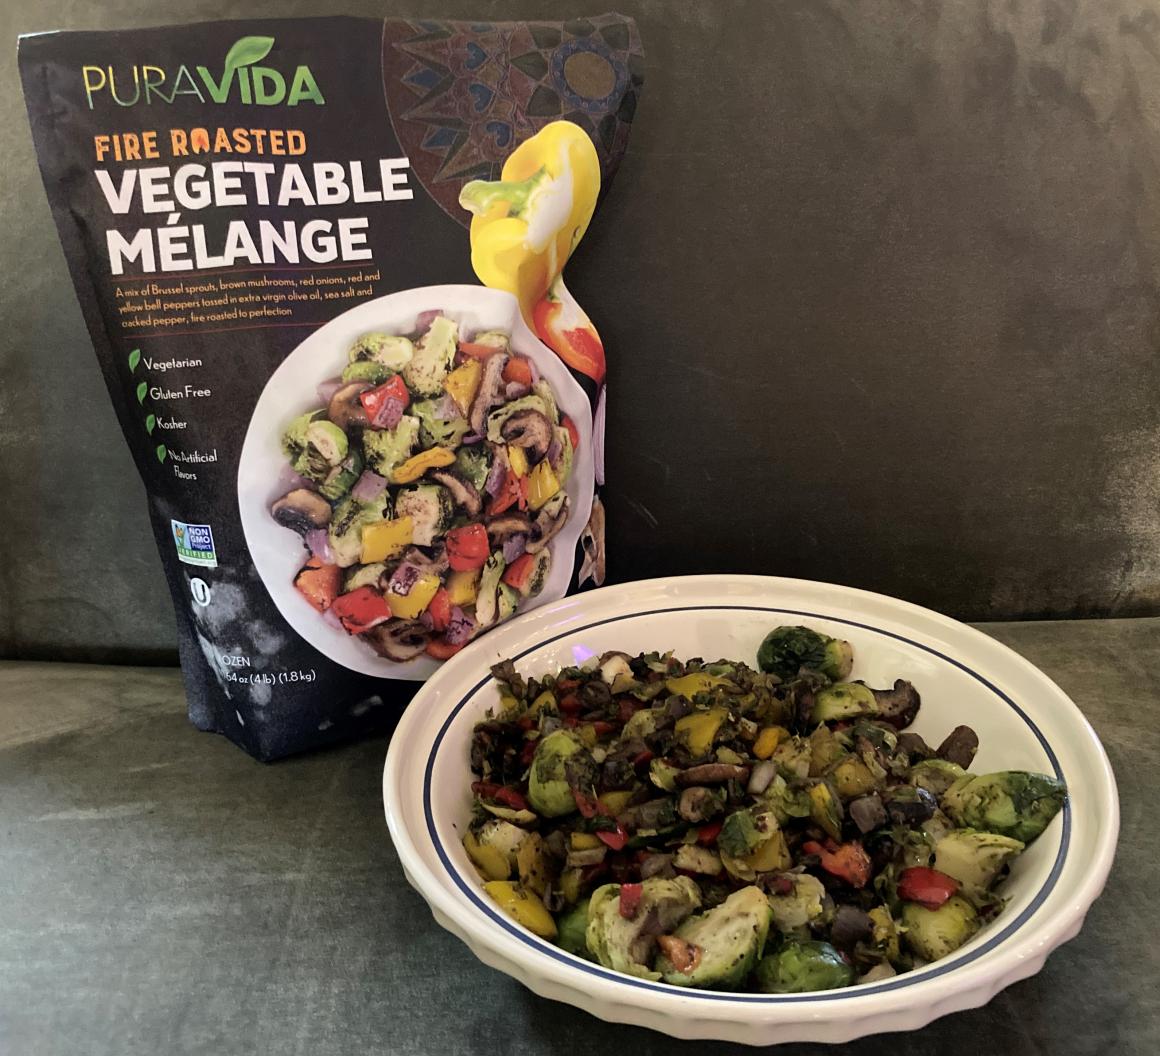 A package of PuraVida fire-roasted vegetable mélange from Costco